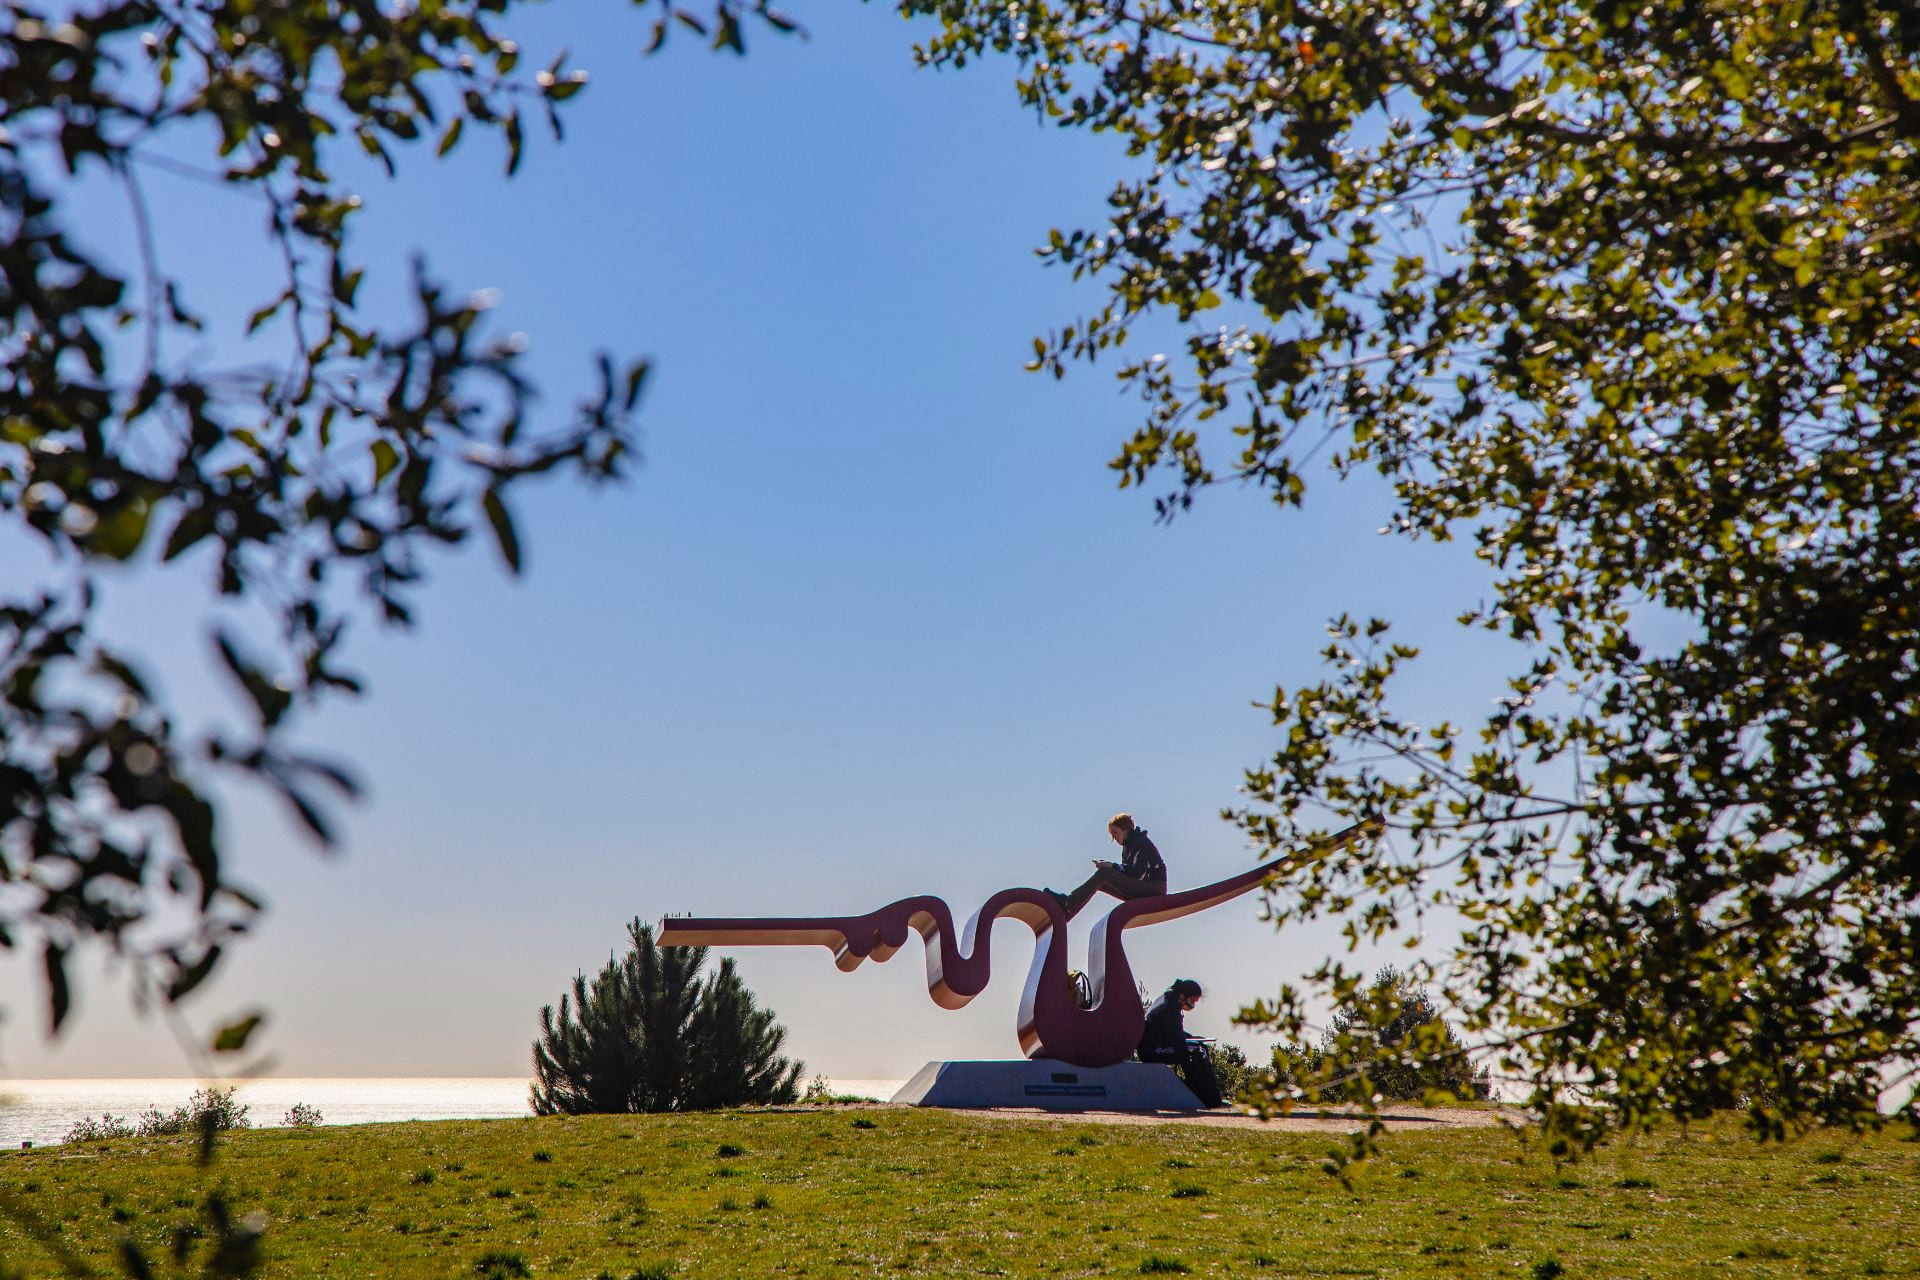 A person sitting on a large outdoor sculpture, seen through the trees with the ocean in the distance